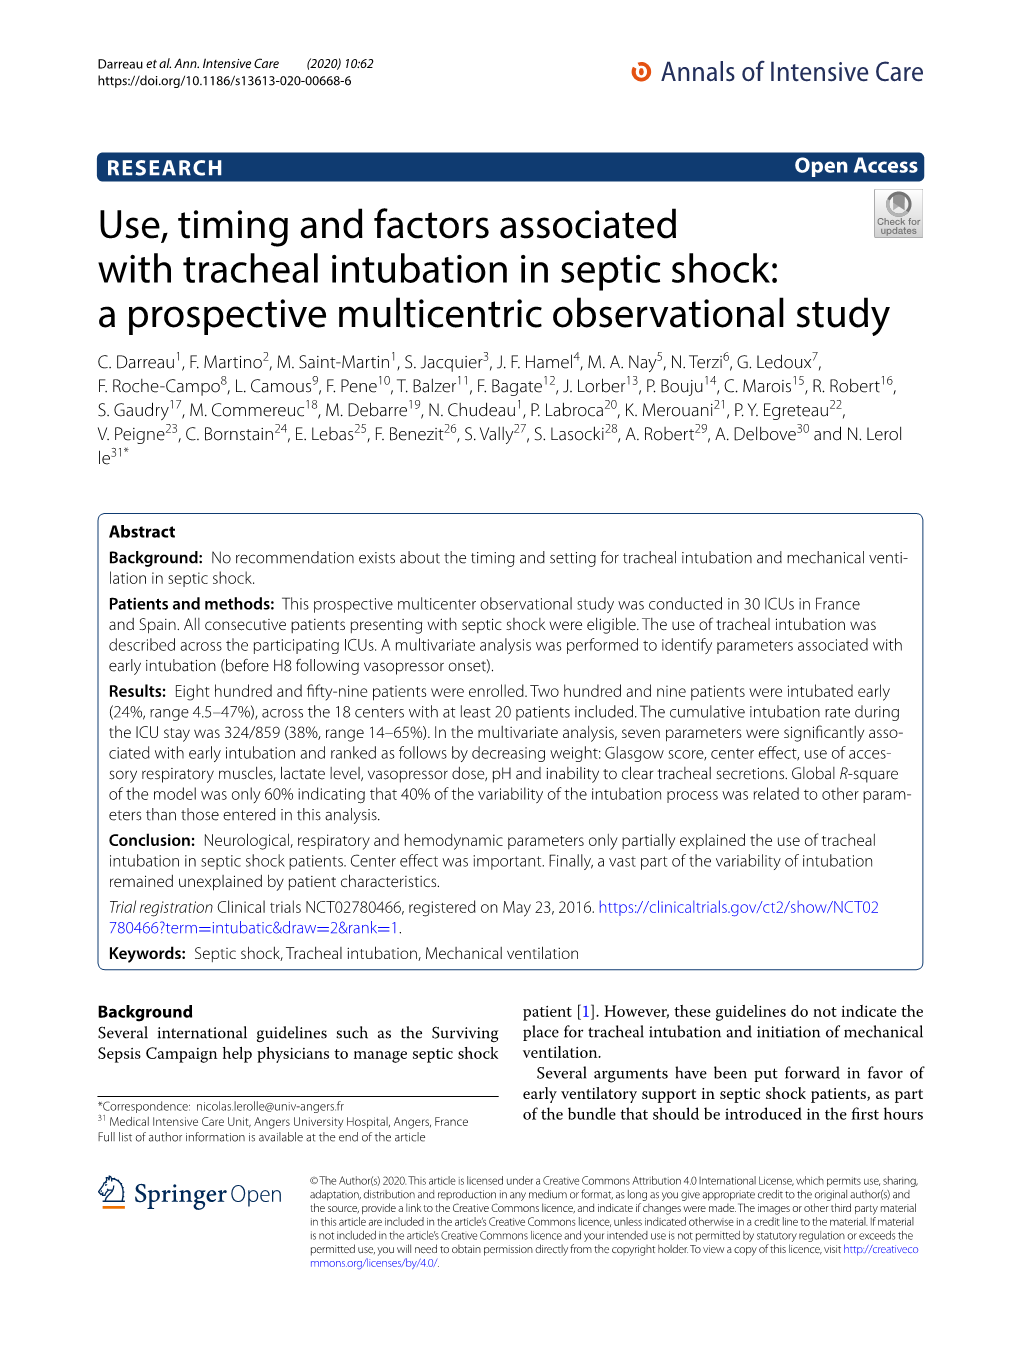 Use, Timing and Factors Associated with Tracheal Intubation in Septic Shock: a Prospective Multicentric Observational Study C